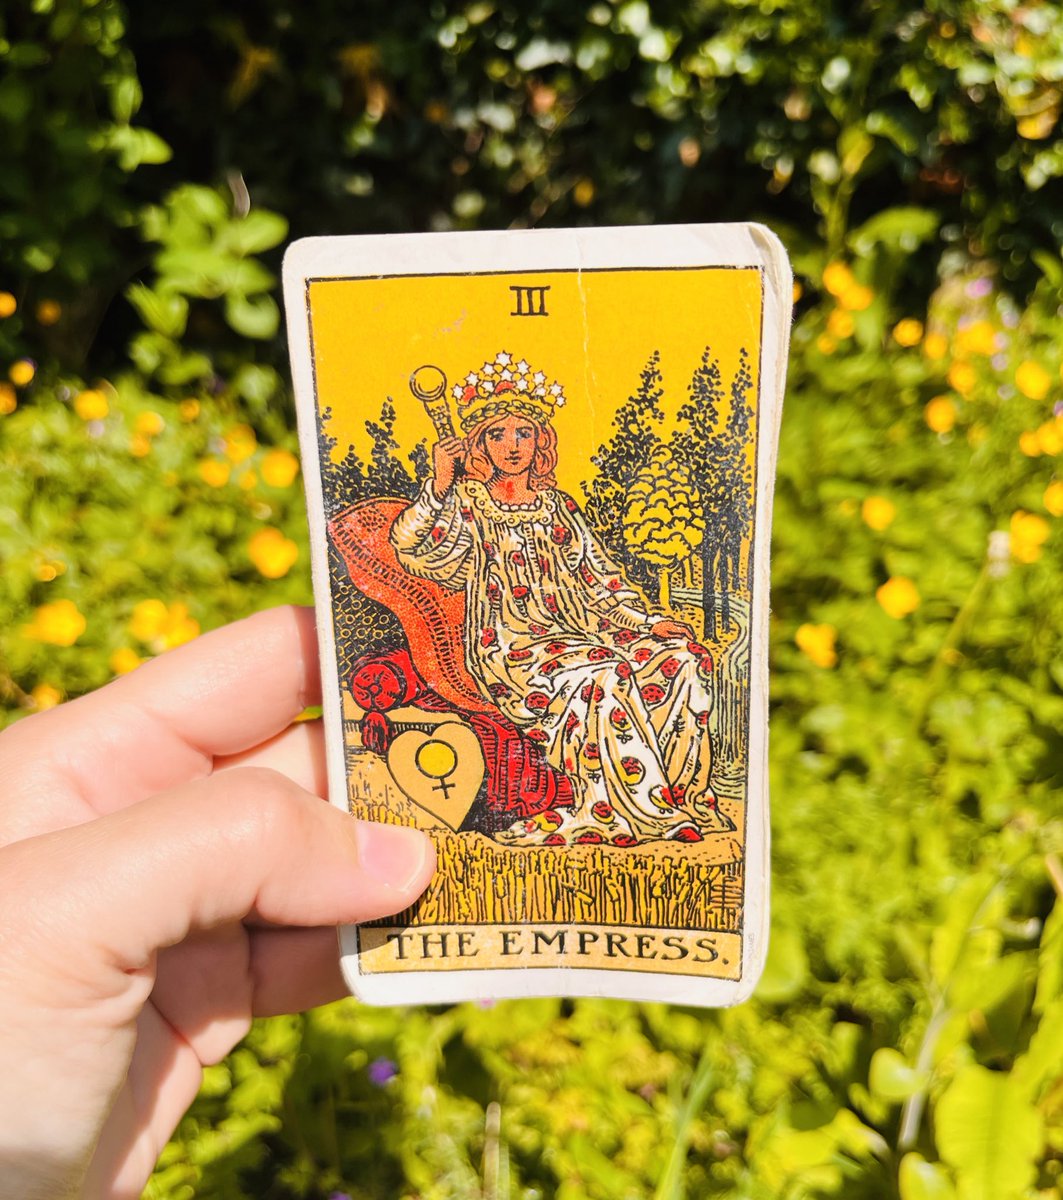 📩 ♡ Message Of The Day - 555 - “You are the phoenix that’s rising above the ashes bc you’ve overcome what was sent to destroy you & your Ancestors are proud of you. Trust that this is a period of no more decay, only abundance & growth as you learn to know your worth.”